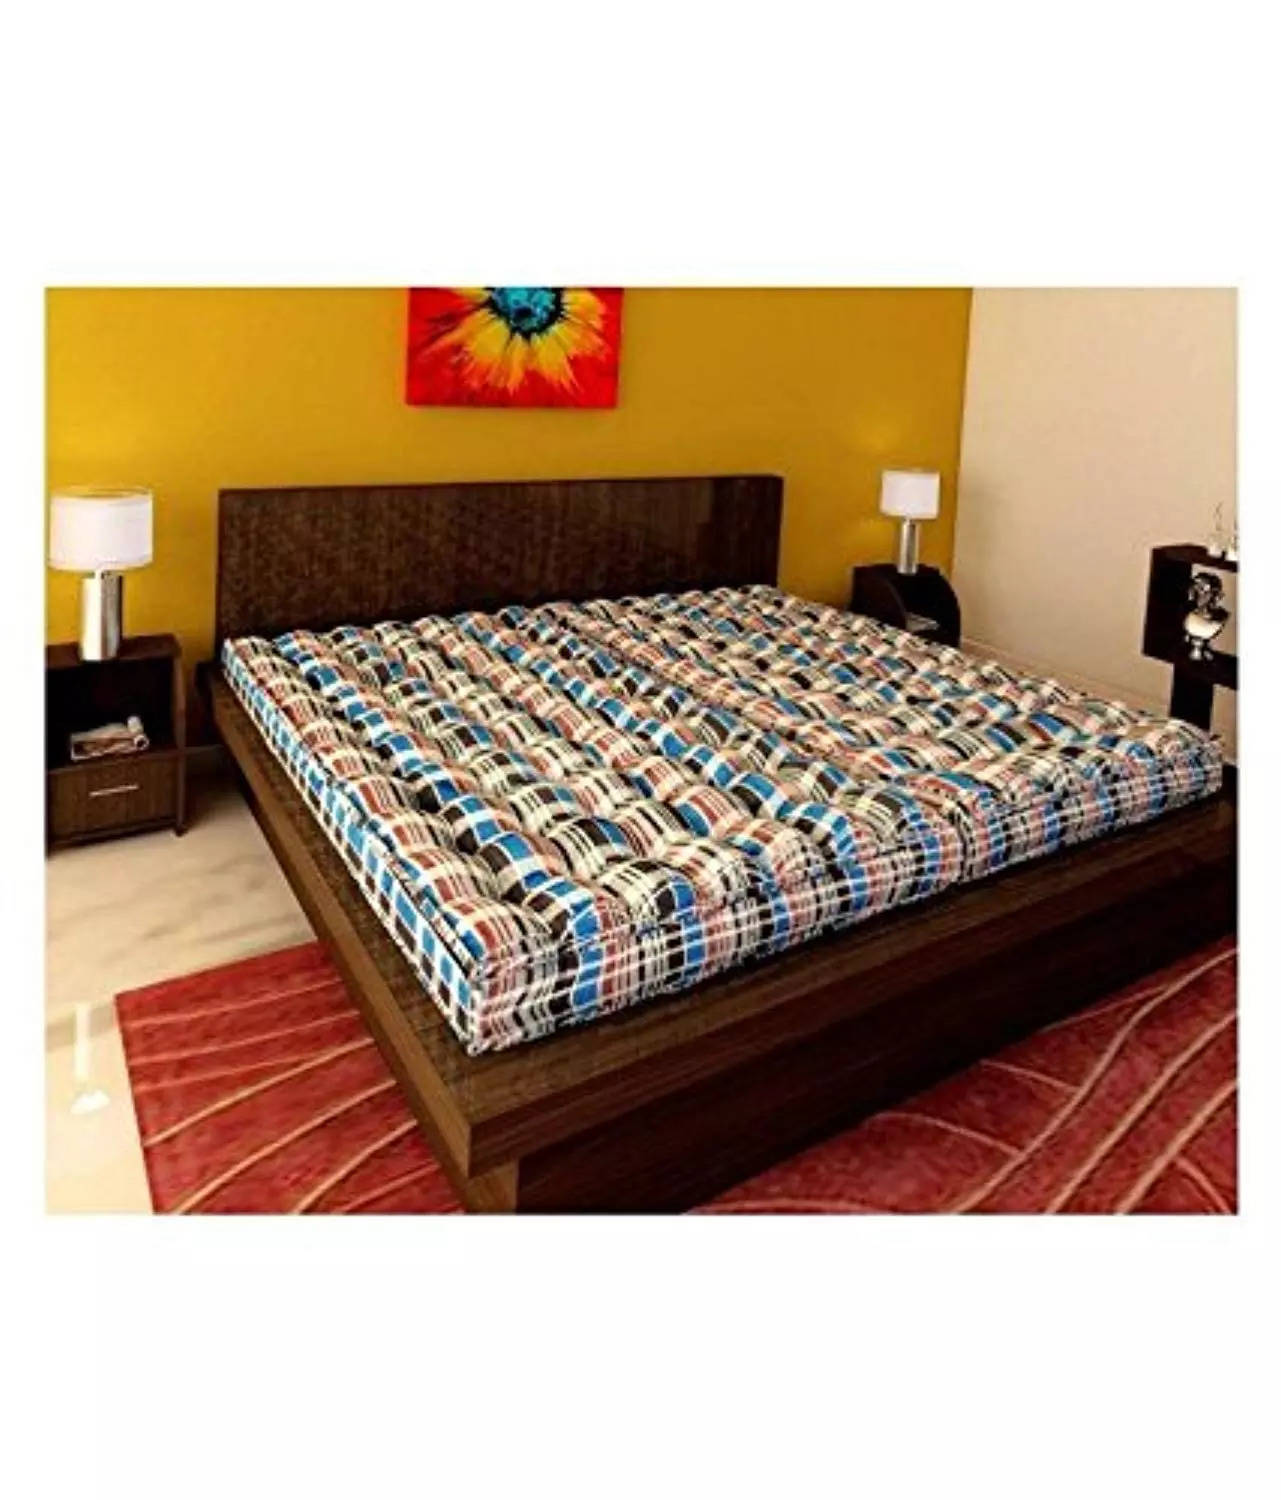 Printed Double Bed Foam Mattress at Rs 80 in Hyderabad